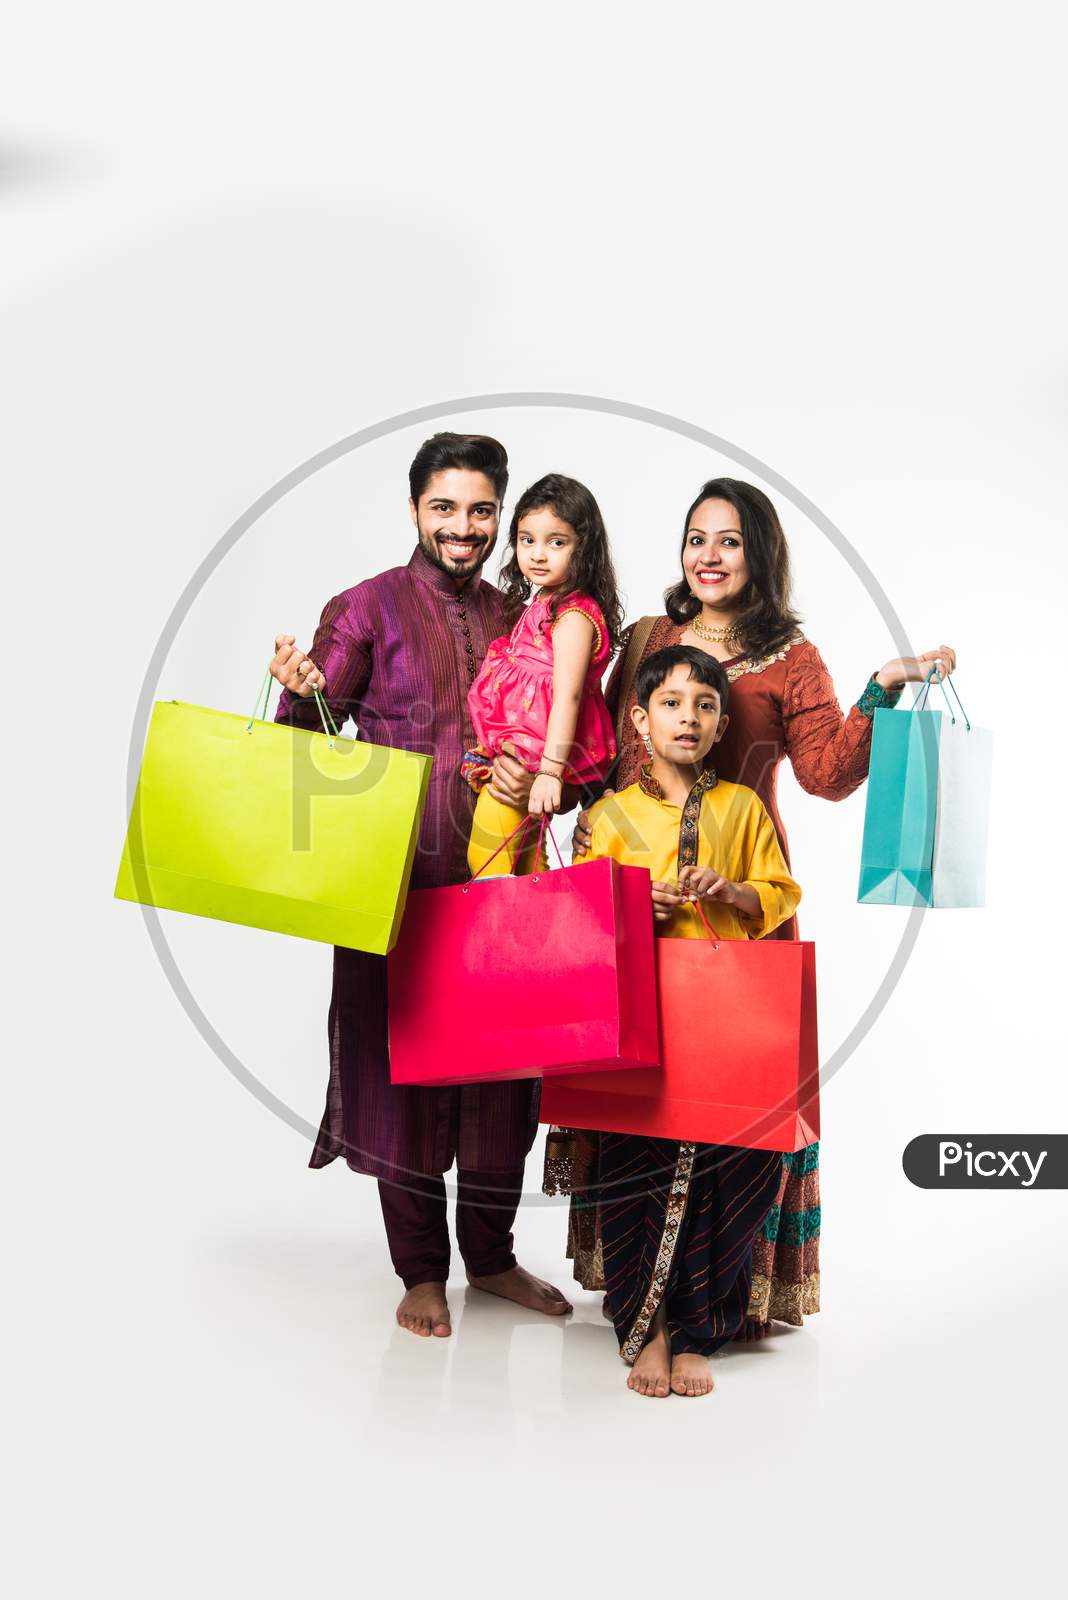 Indian family celebrating Diwali / Deepavali in traditional wear with shopping bags, standing isolated over white background